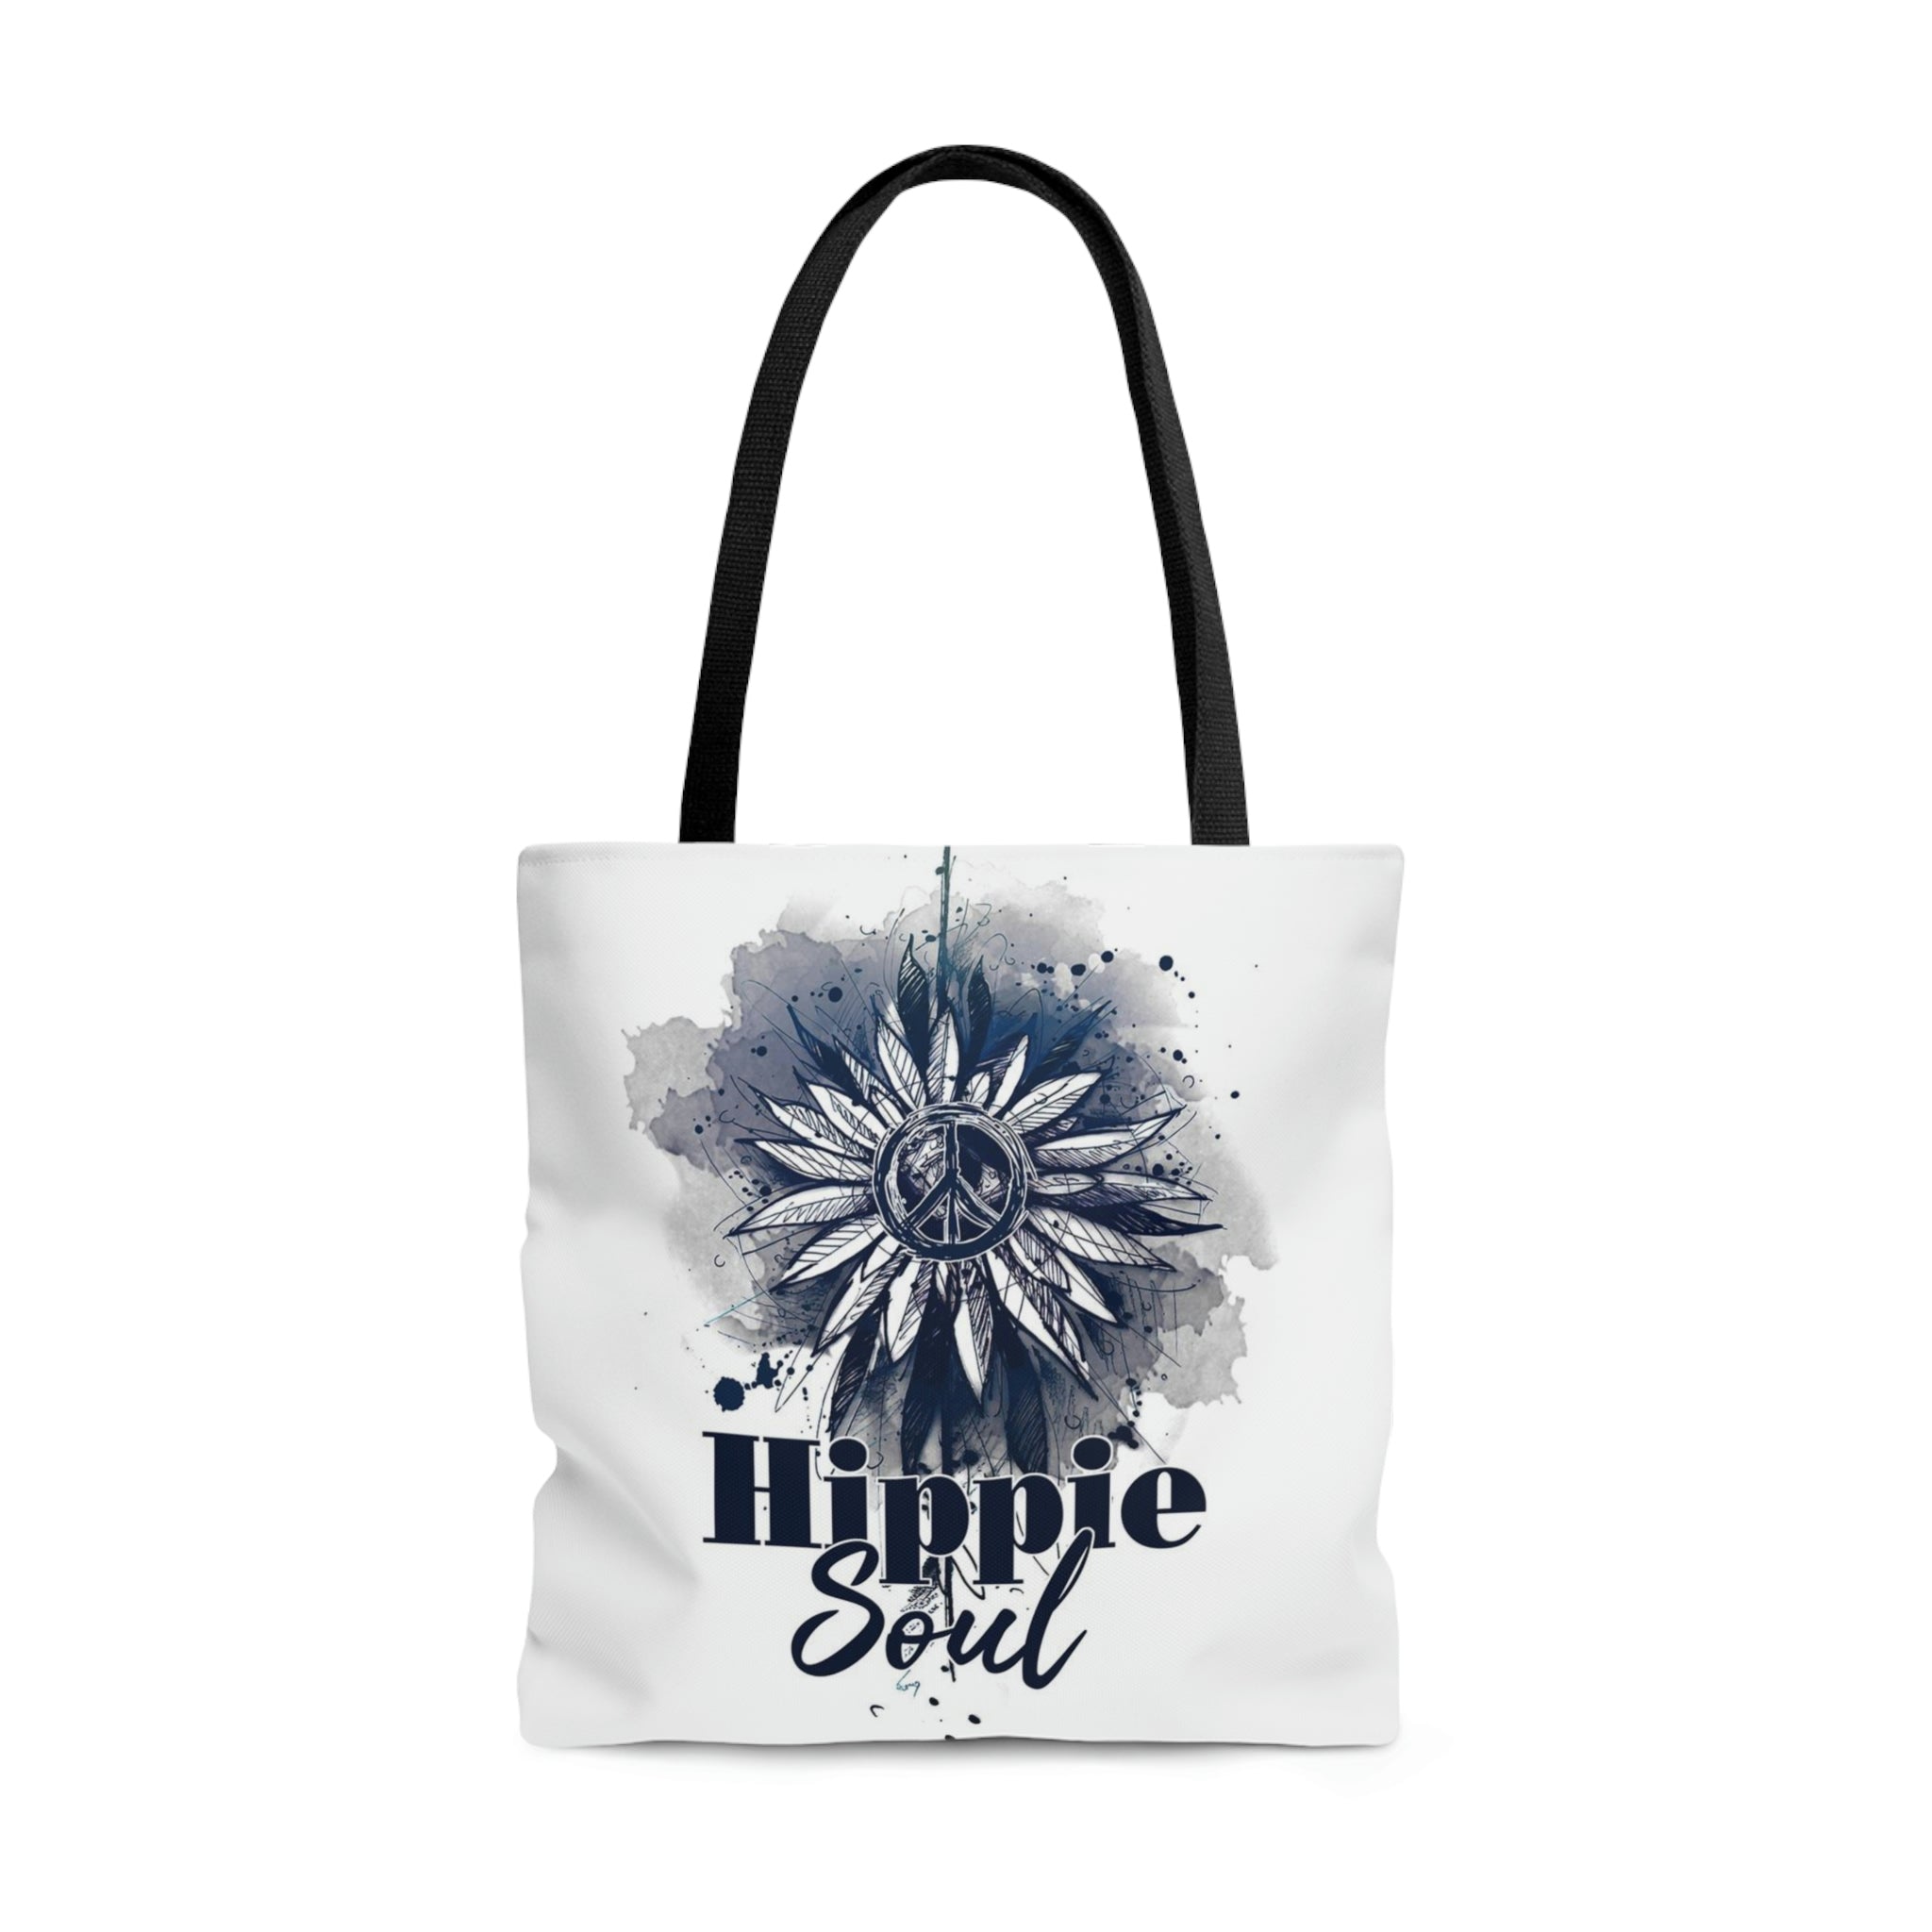 HIPPIE SOUL SUNFLOWER TOTE BAG - TY2002235